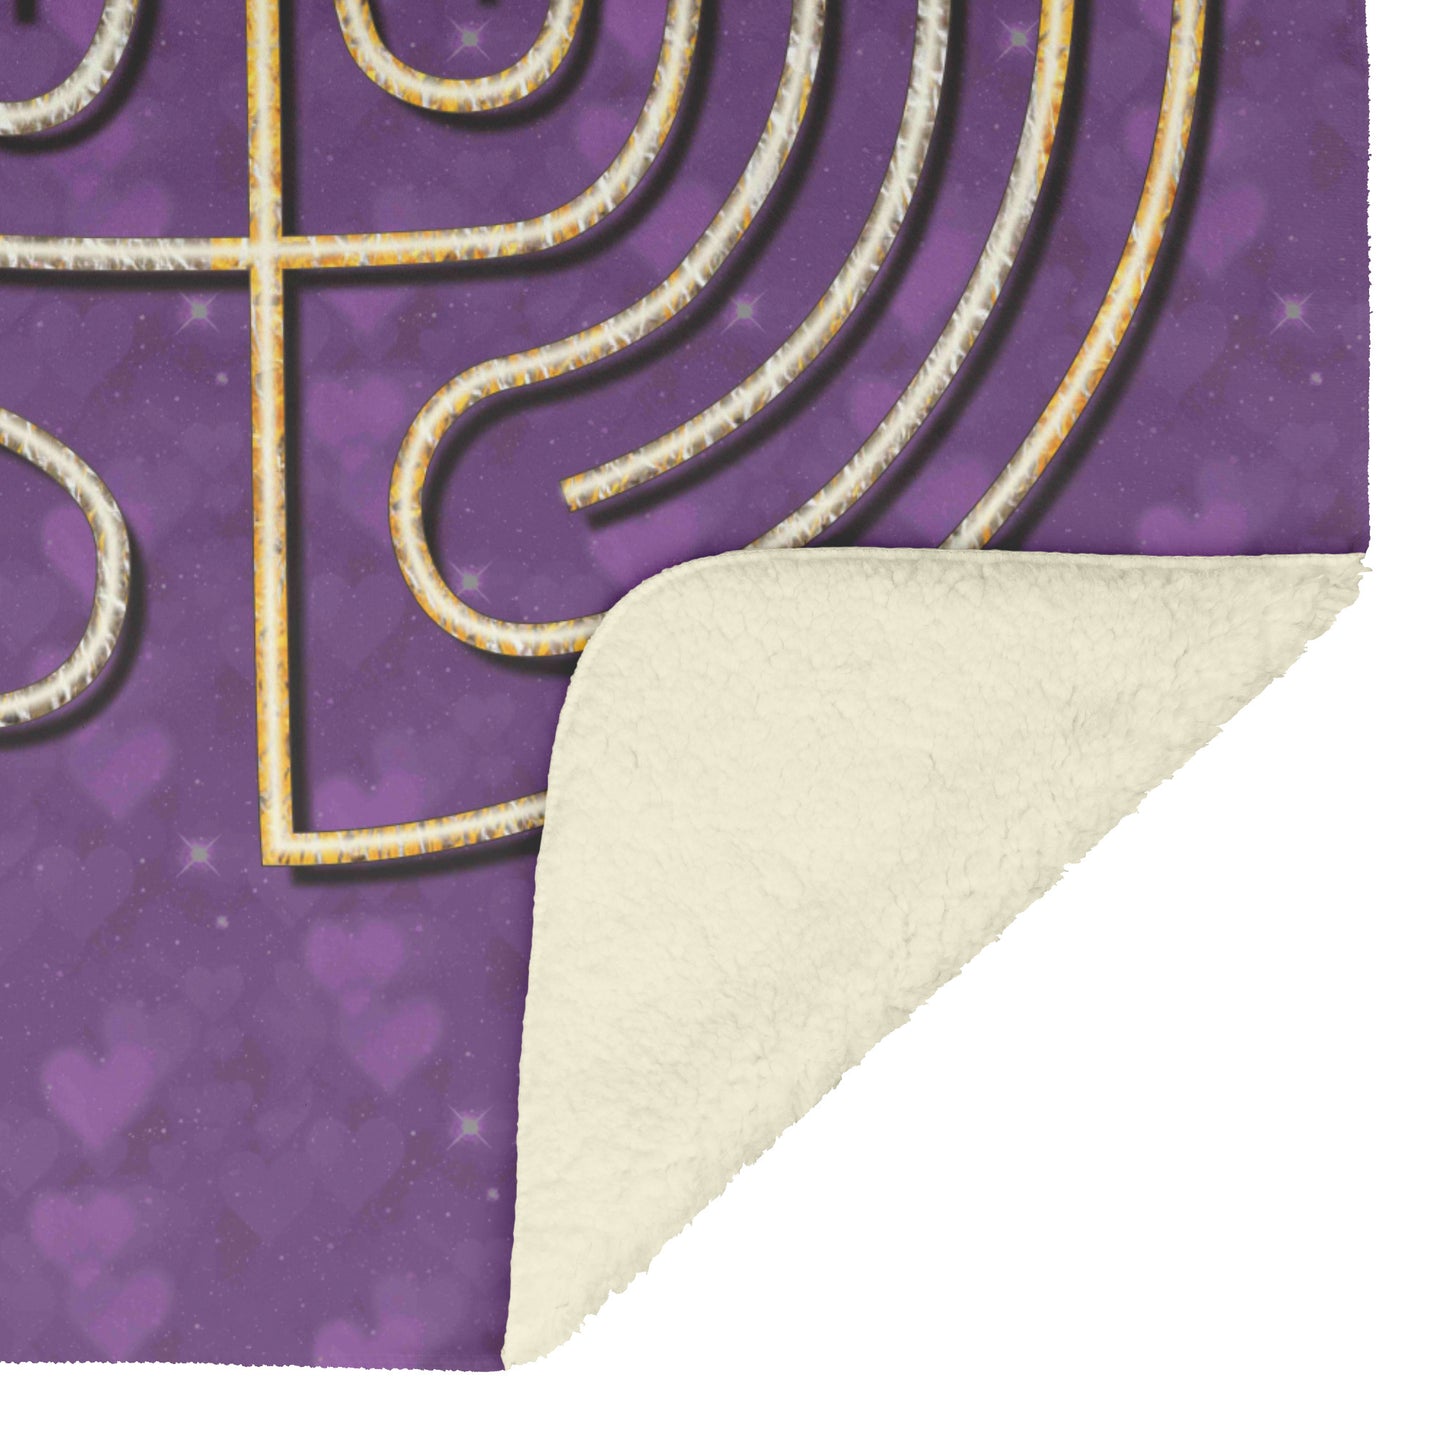 Cretian Labyrinth Therapy Blanket - Purple